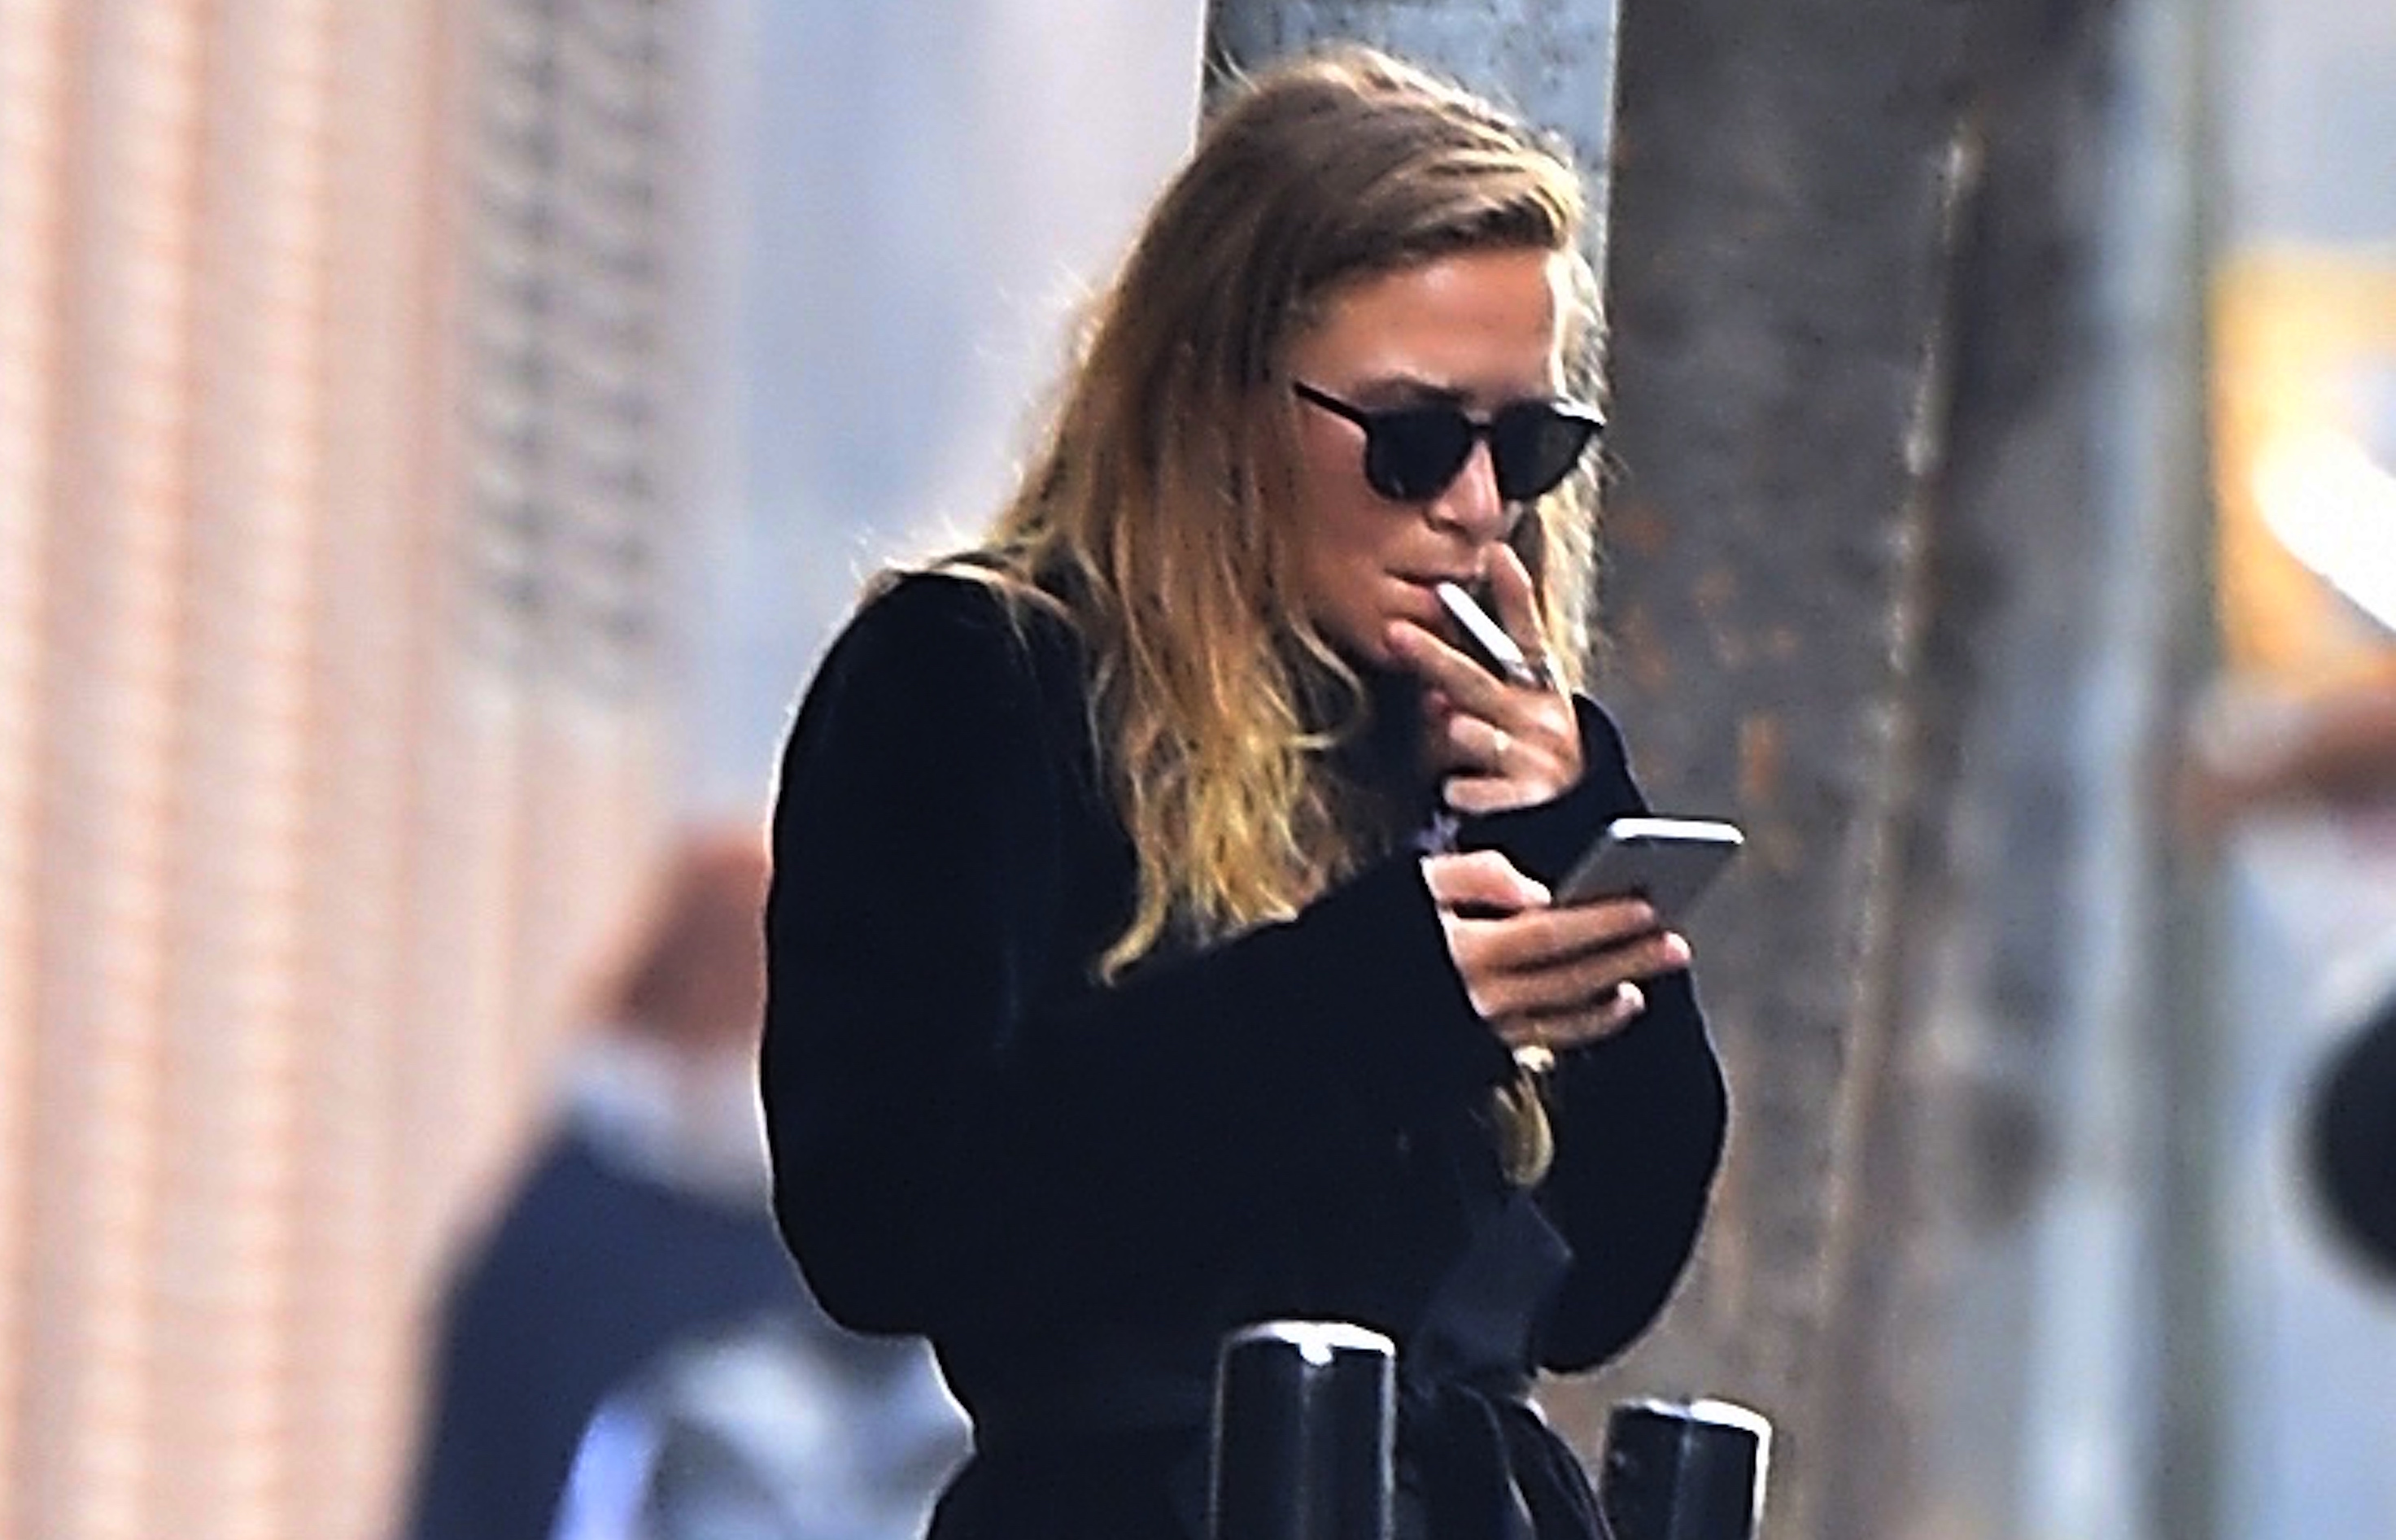 Olsen Twins Smoking A Look Into Their Extreme Chainsmoking Habit https www lifeandstylemag com posts olsen twins smoking 157649